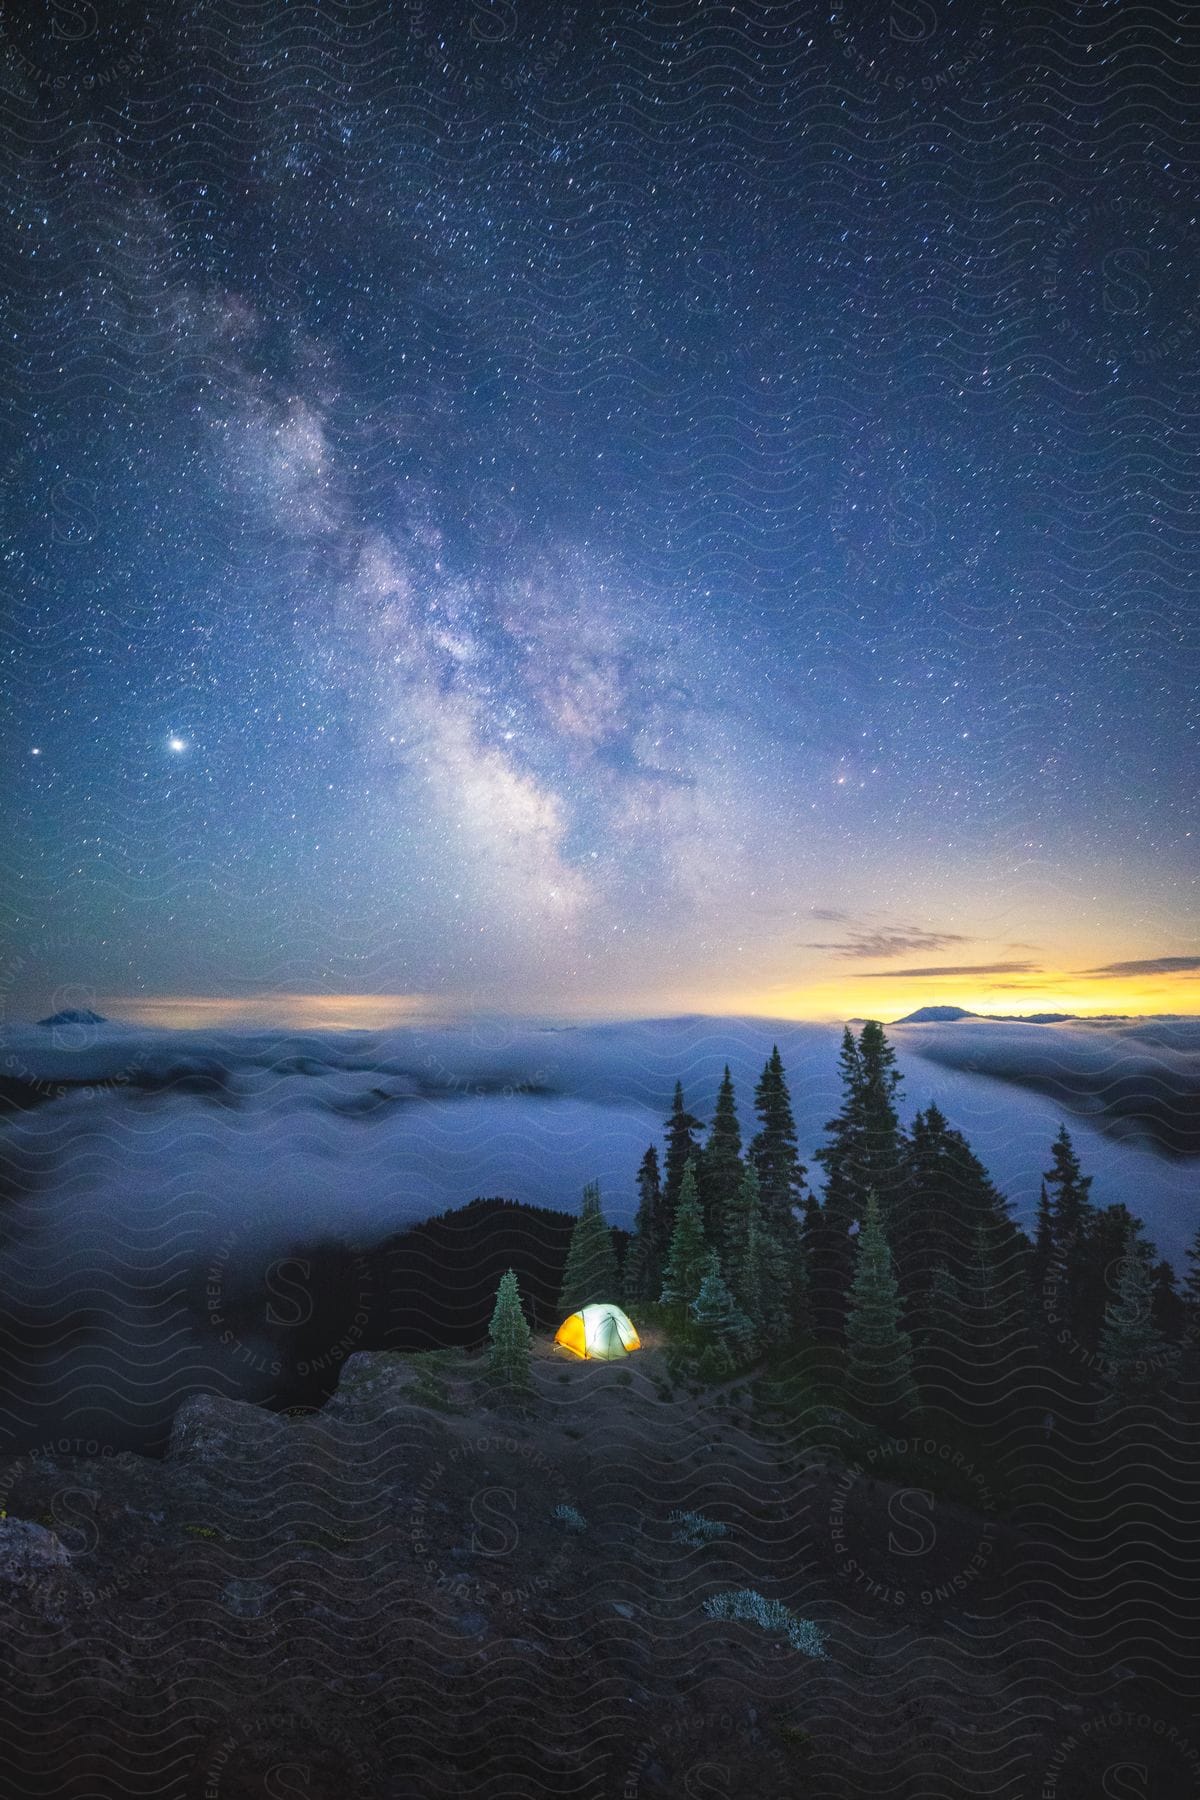 A tent illuminated under a starry sky and a sunrise on the horizon